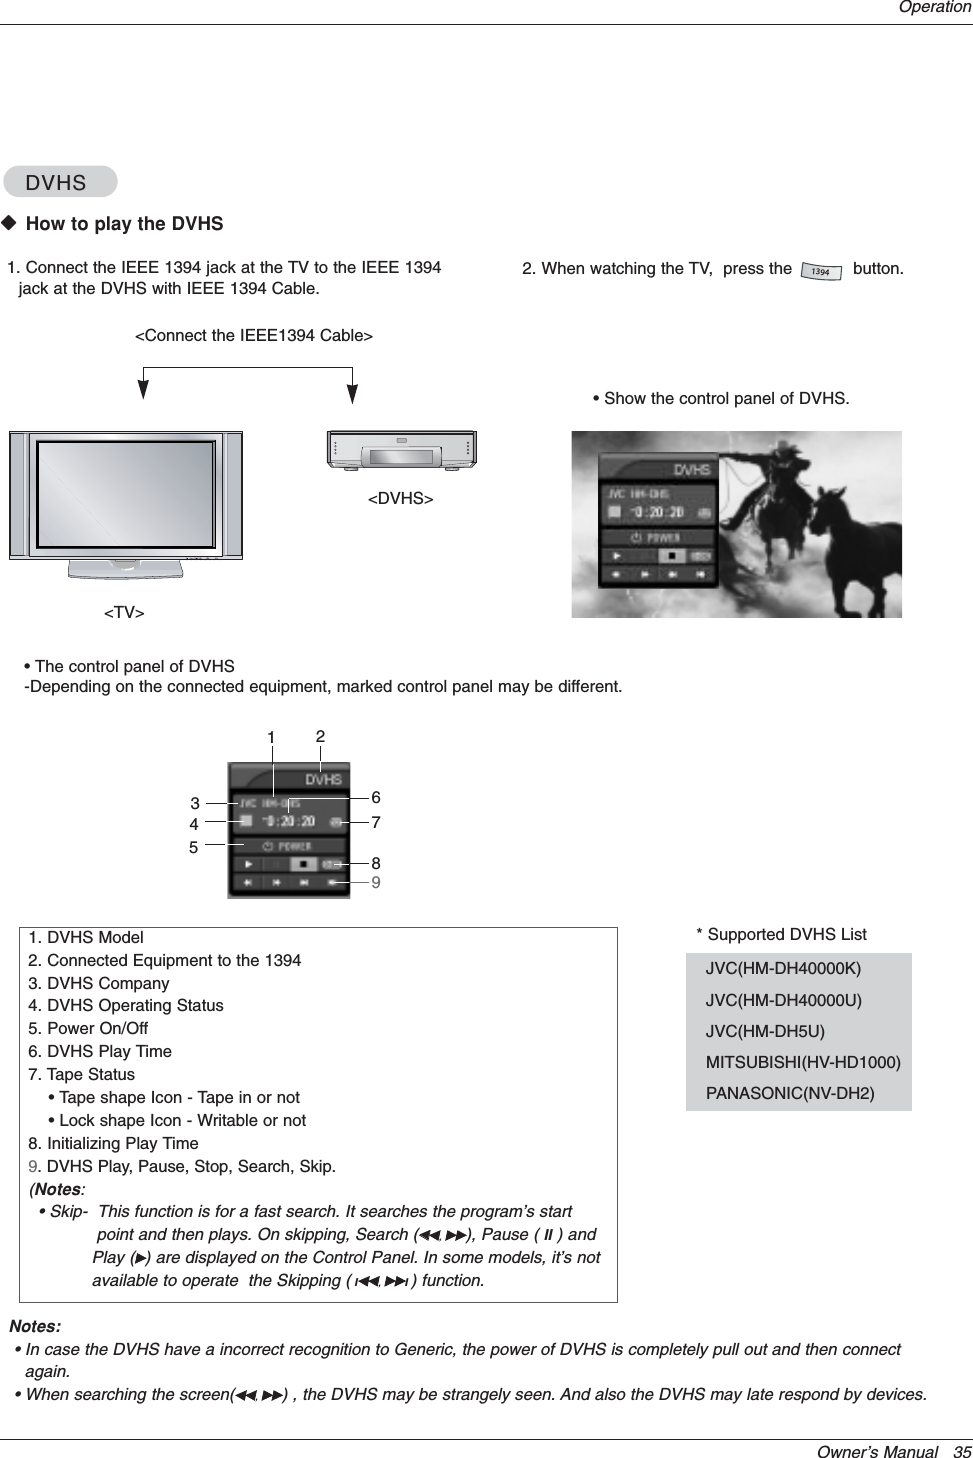 Owner’s Manual   35OperationDVHSDVHSWWHow to play the DVHS&lt;TV&gt;&lt;DVHS&gt;1. Connect the IEEE 1394 jack at the TV to the IEEE 1394jack at the DVHS with IEEE 1394 Cable.2. When watching the TV,  press the            button.1394&lt;Connect the IEEE1394 Cable&gt;• The control panel of DVHS -Depending on the connected equipment, marked control panel may be different.34• Show the control panel of DVHS.57689121. DVHS Model2. Connected Equipment to the 13943. DVHS Company4. DVHS Operating Status5. Power On/Off6. DVHS Play Time7. Tape Status• Tape shape Icon - Tape in or not • Lock shape Icon - Writable or not 8. Initializing Play Time9. DVHS Play, Pause, Stop, Search, Skip.(Notes:• Skip-  This function is for a fast search. It searches the program’s startSkip-    point and then plays. On skipping, Search (FFF,GG), Pause ( II ) andSkip-    Play (G) are displayed on the Control Panel. In some models, it’s notSkip-    available to operate  the Skipping ( IFF,GGI) function.* Supported DVHS ListJVC(HM-DH40000K)JVC(HM-DH40000U)JVC(HM-DH5U)MITSUBISHI(HV-HD1000) PANASONIC(NV-DH2) Notes:• In case the DVHS have a incorrect recognition to Generic, the power of DVHS is completely pull out and then connectagain.• When searching the screen(FF,GG) , the DVHS may be strangely seen. And also the DVHS may late respond by devices.